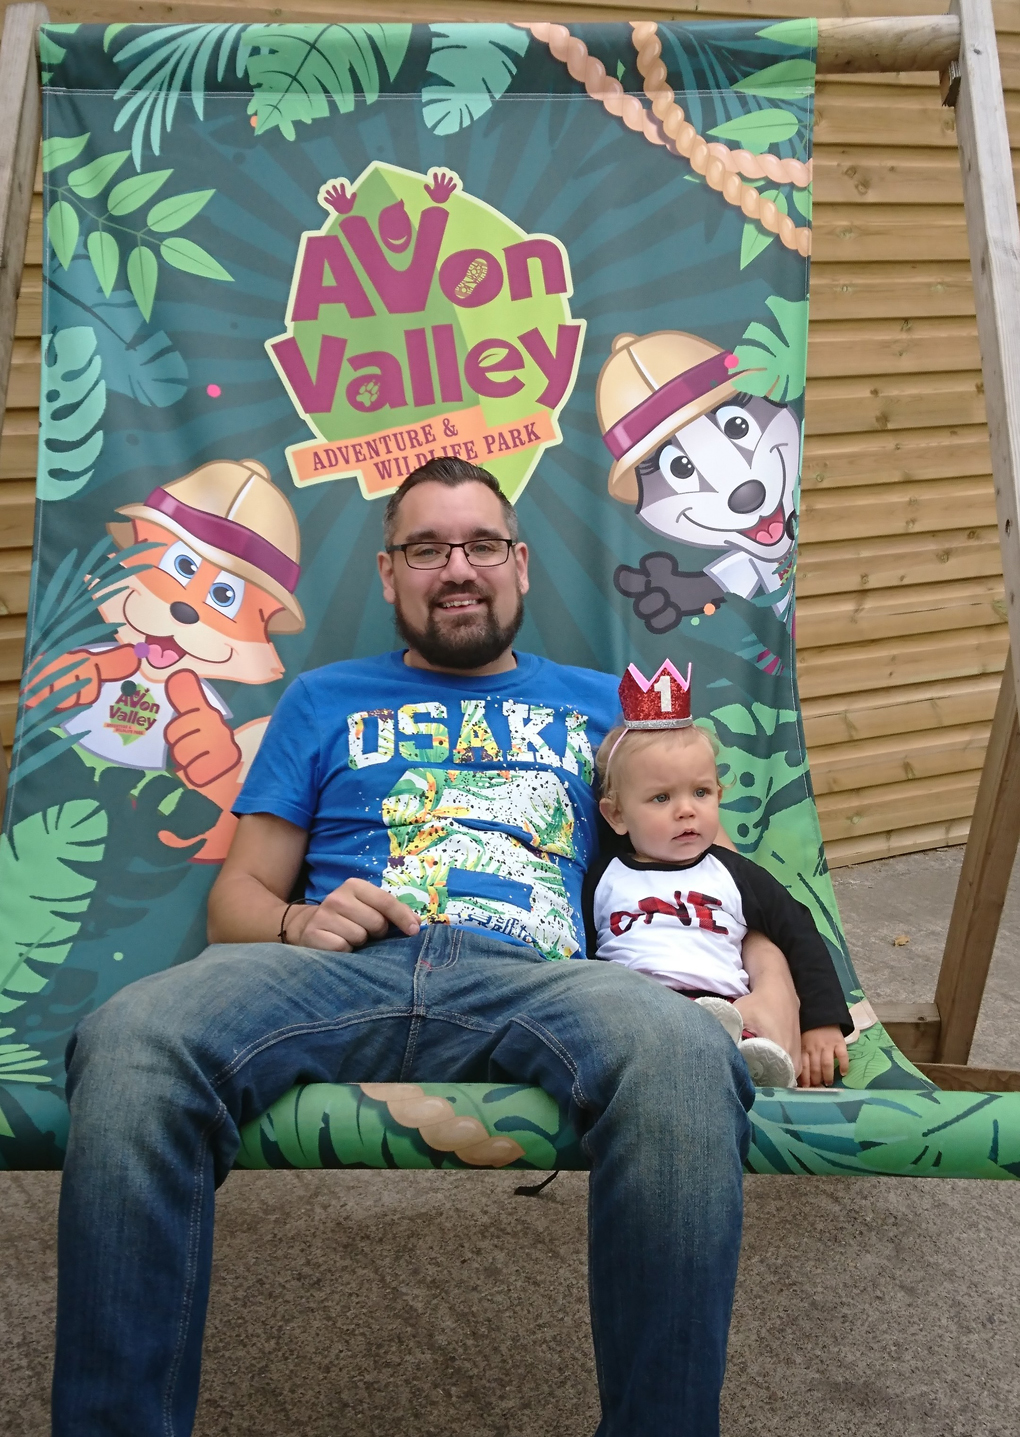 A ginormous deckchair at the entrance to Avon Valley Wildlife Park in which two cheeky chaps are sitting - my youngest son Lawrence and his son Jaxson who is wearing a little red crown with number 1 on.  We spent a fun day there for Jaxson’s first birthday. The prize attraction was The Pig Race run by five year old Saddle Back pigs. We fell in love with Barry an Aragolis goat. He had two large curved horns and long ears and stood 4 1/2 feet tall! A gentle giant.